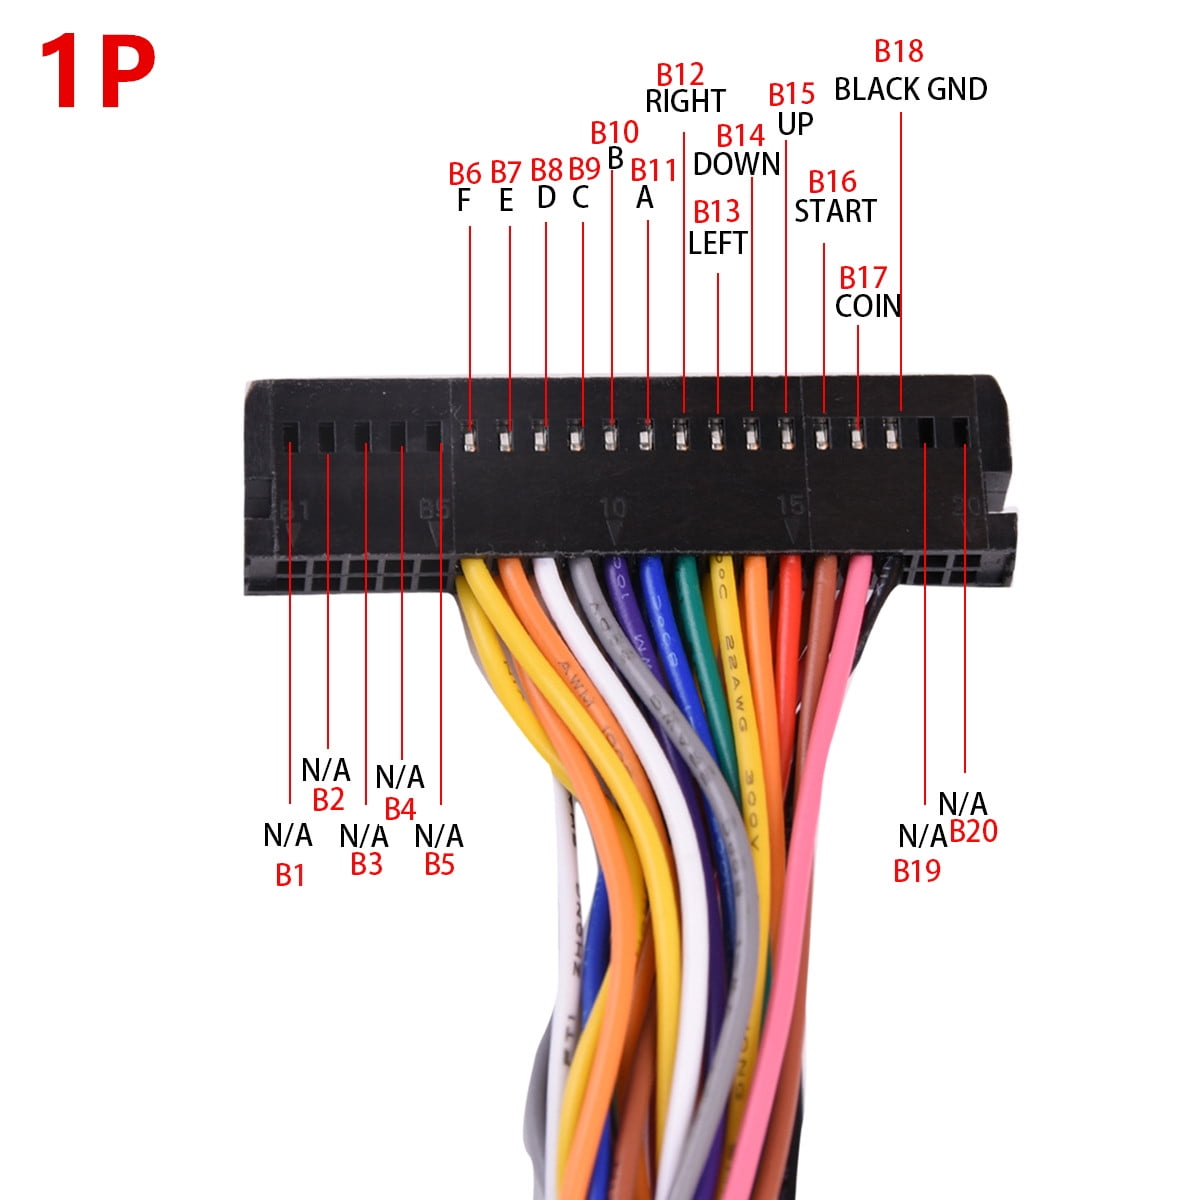 1 * Console Board 2 Players Machine Harness Wiring Cable Arcade Parts Edition 20Pin*2 For Pandora's Box Walmart.com